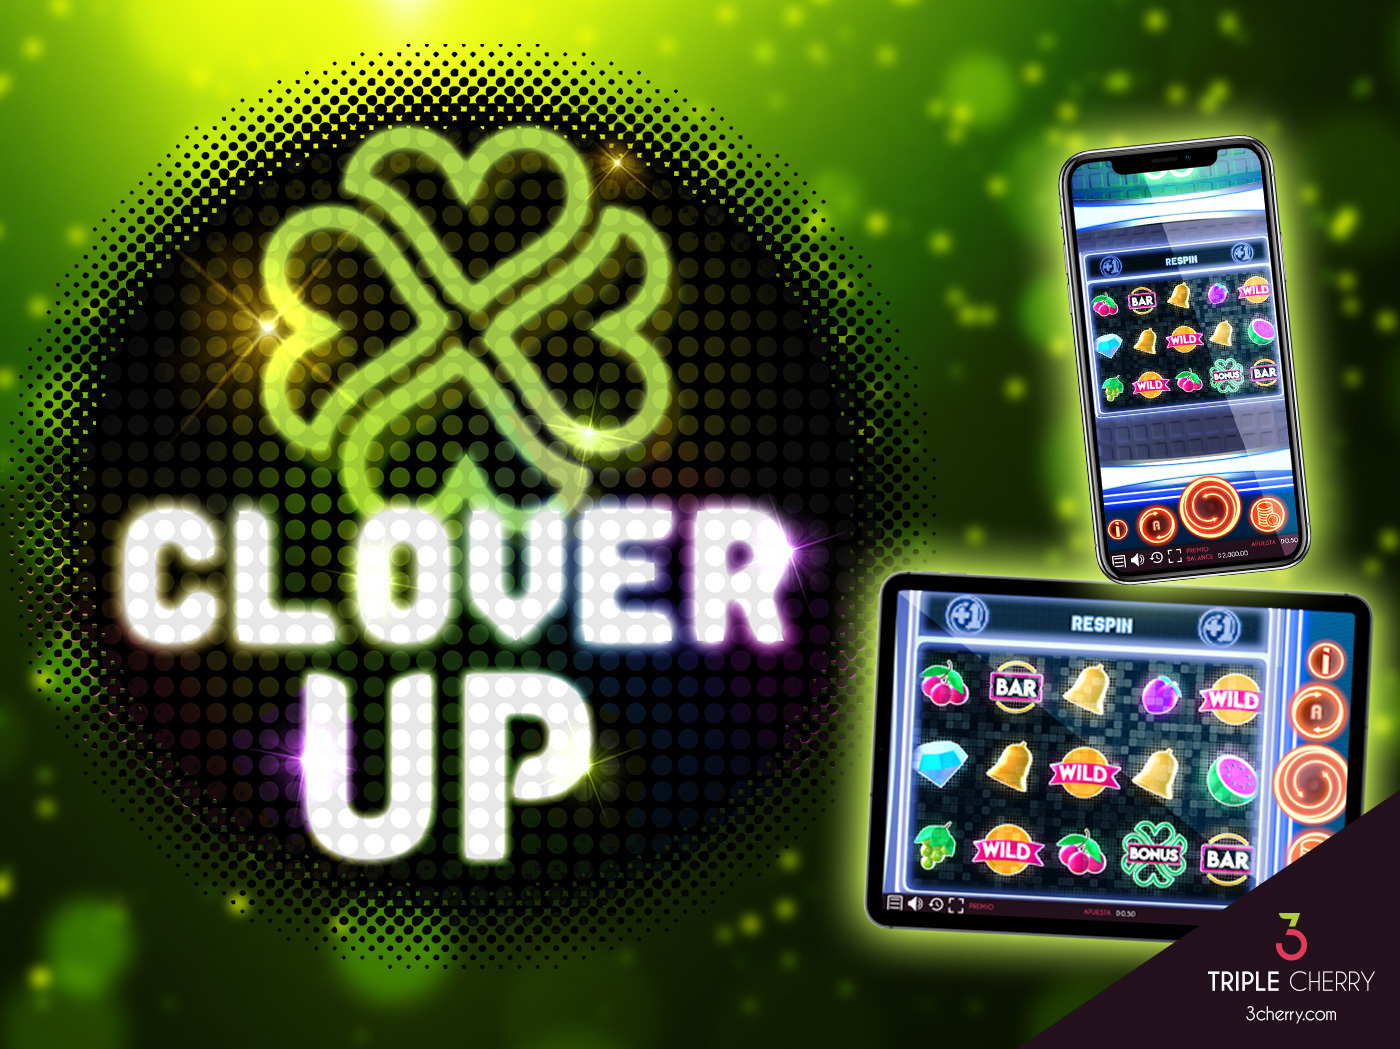 THE HOTTEST NEW SLOT MACHINE   Clovers u0026 Gold!!!! Plus Double Top Dollar   Live Slot Play